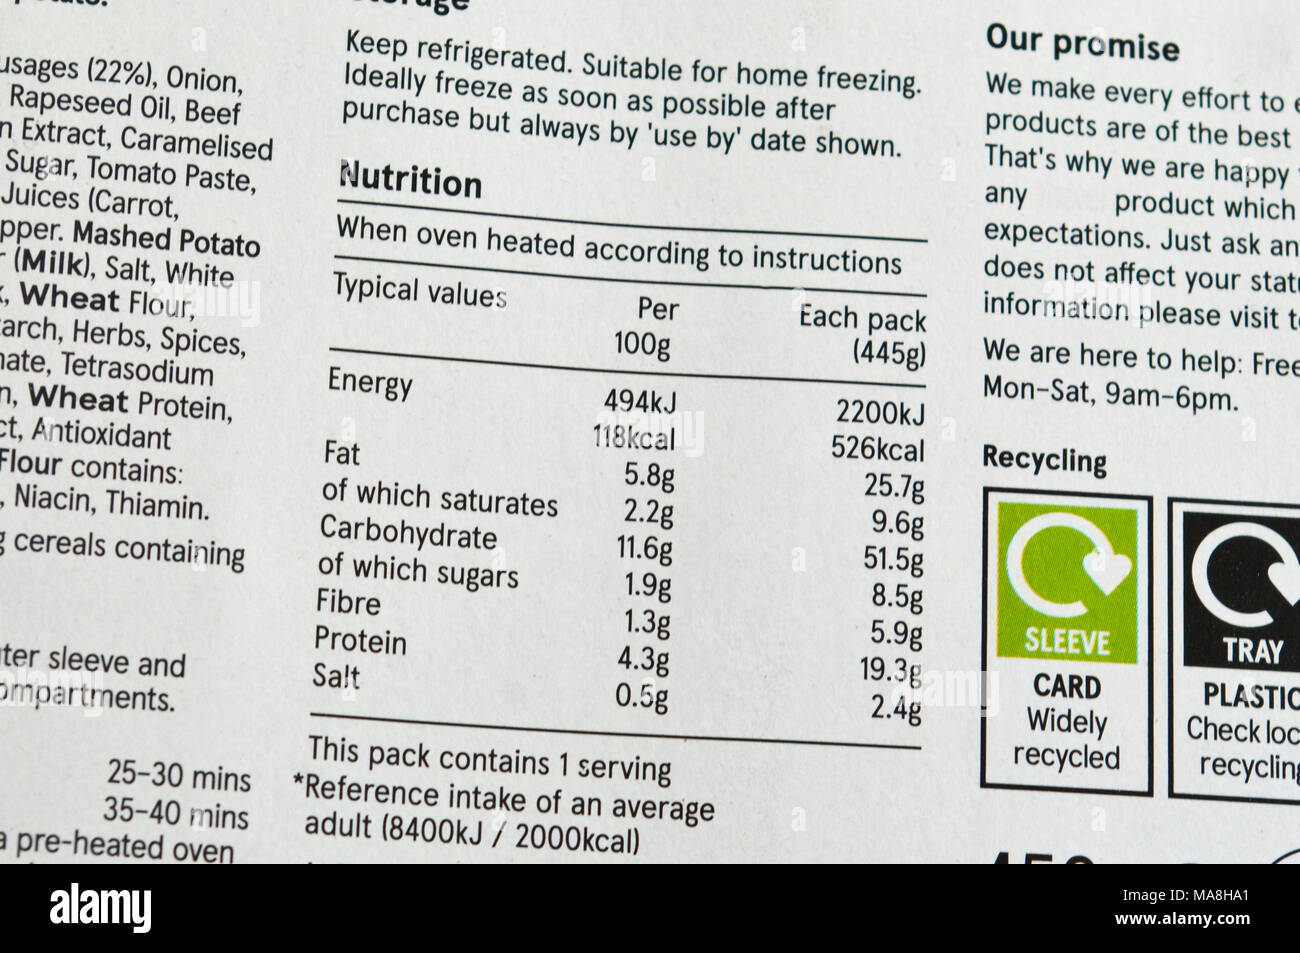 Nutrition Information On The Rear Of A Ready Meal Food Packaging Stock Photo